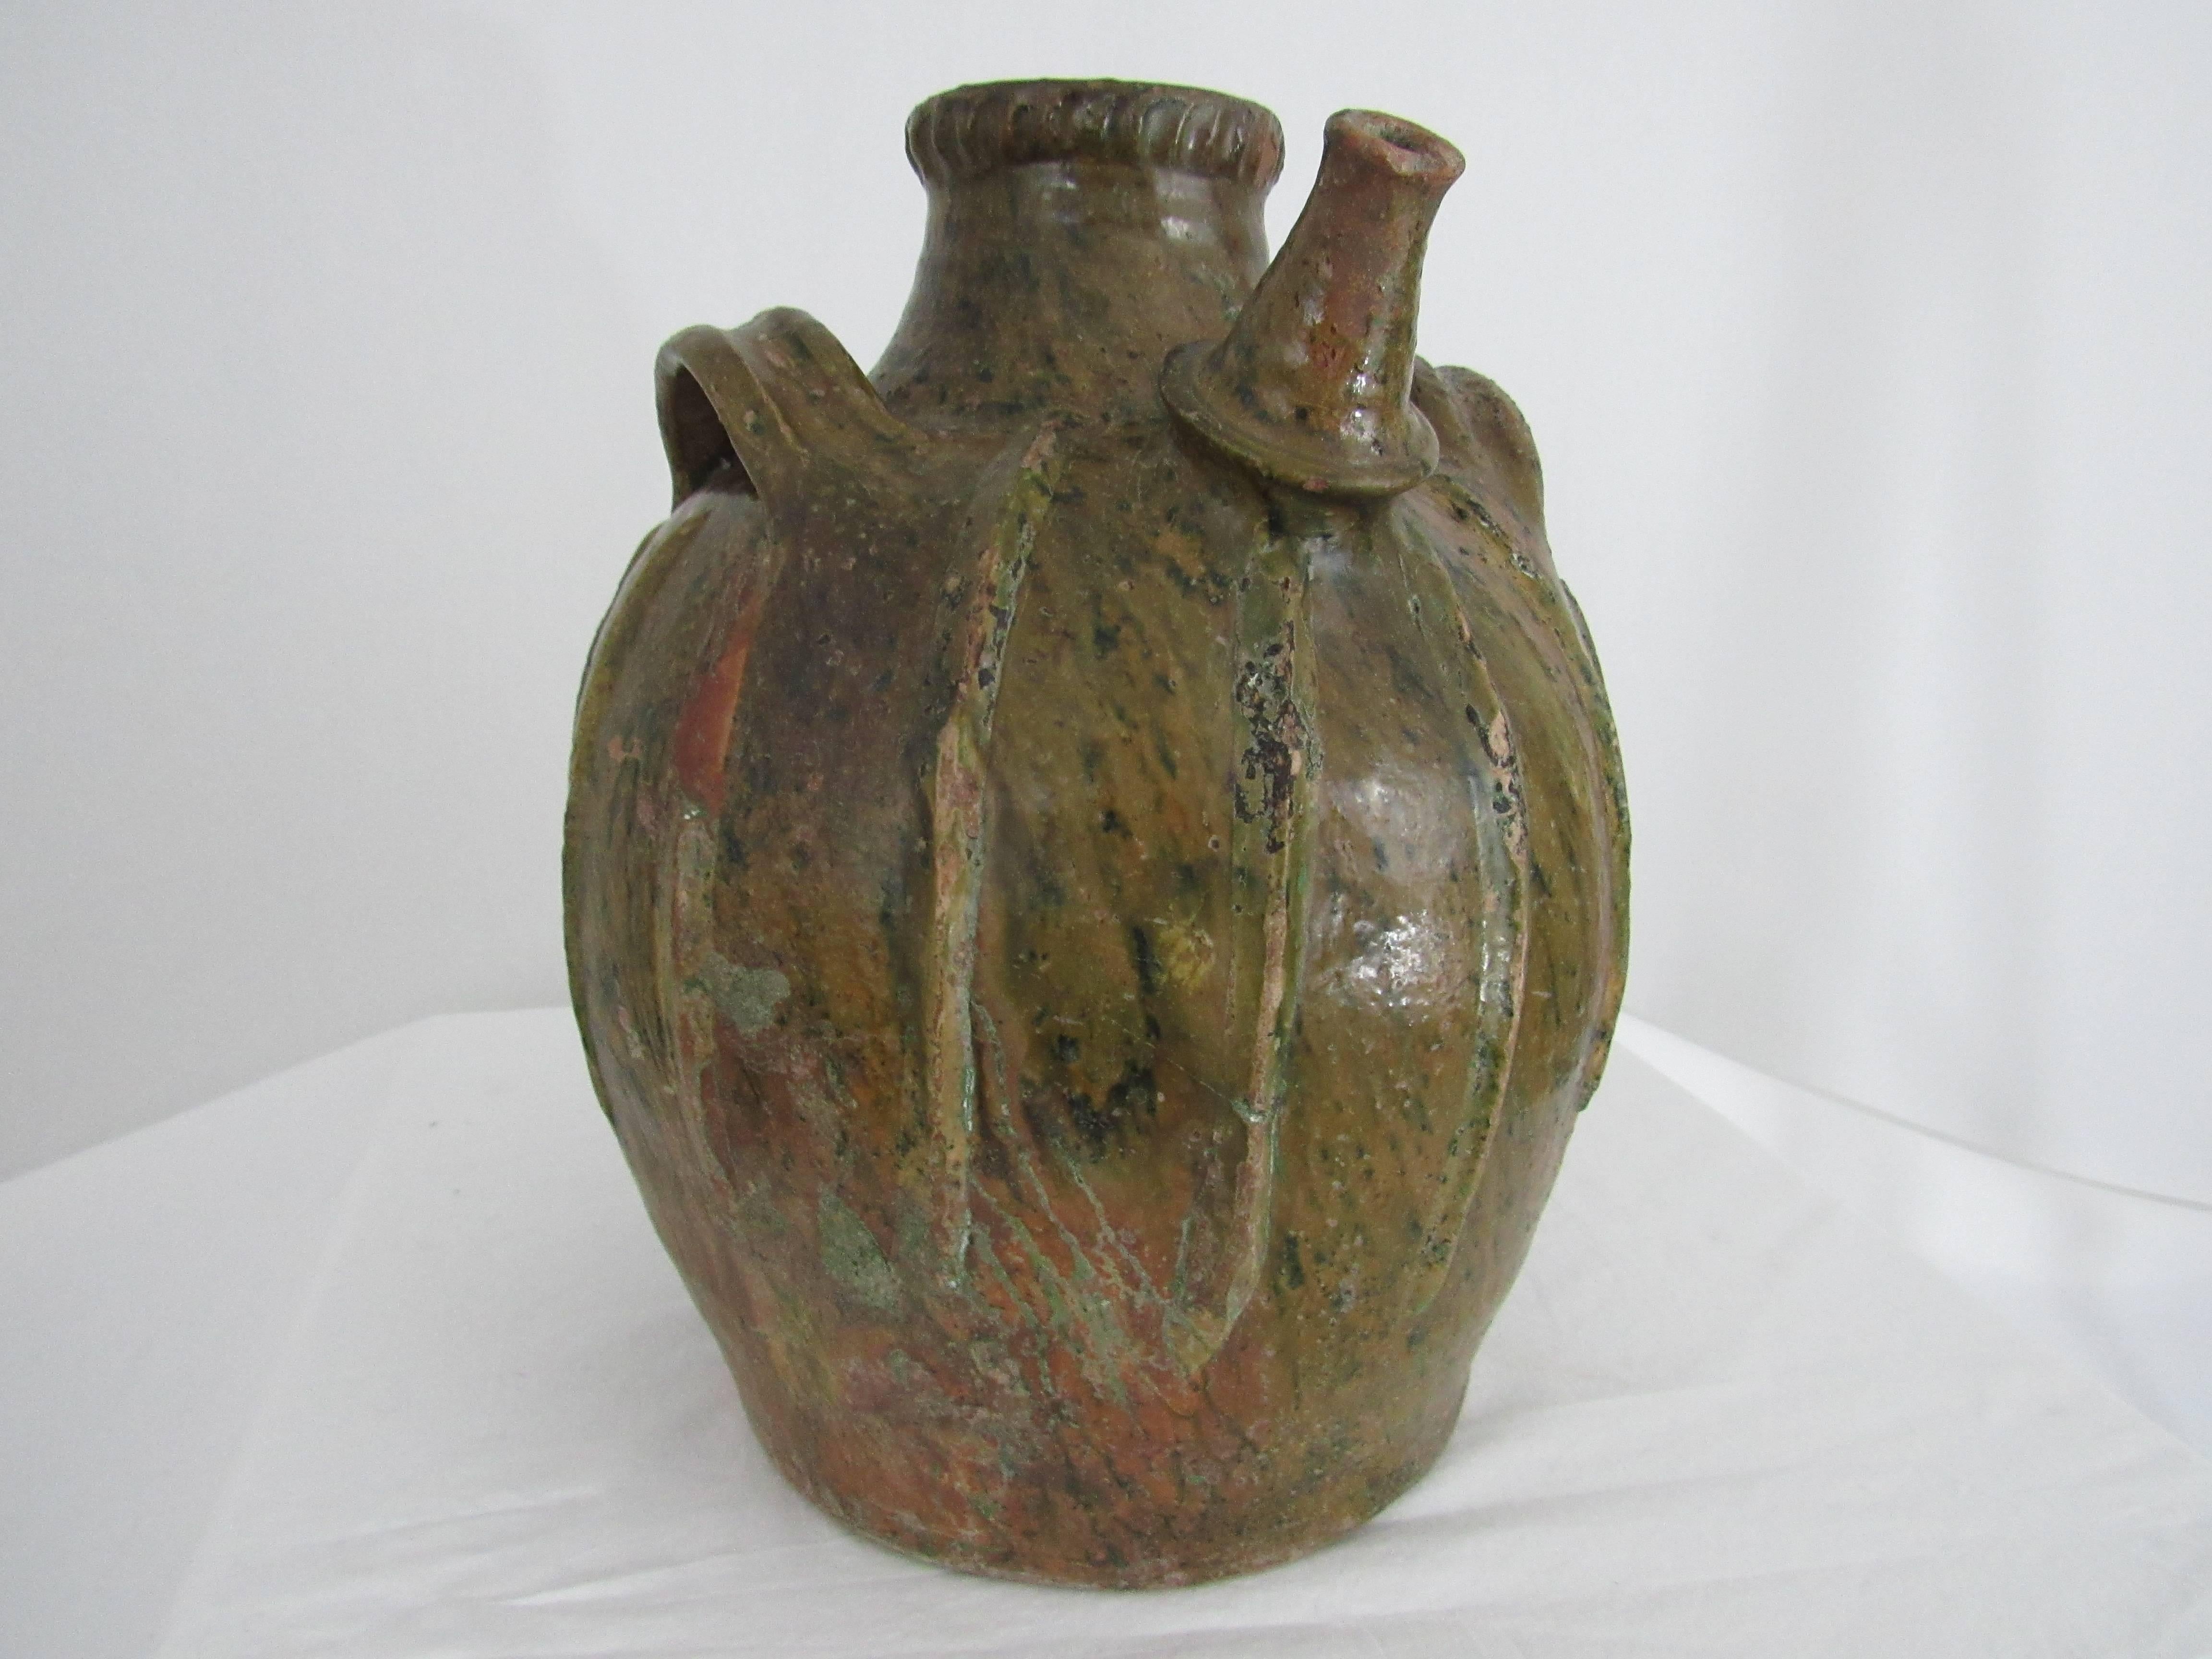 French oil jar from Auvergne region in France. A three-handled green-glazed terracotta storage vessel, with pouring spout. It has a wonderful textured surface, in part due to the scaled and ribbed decoration applied onto the body. There is variation